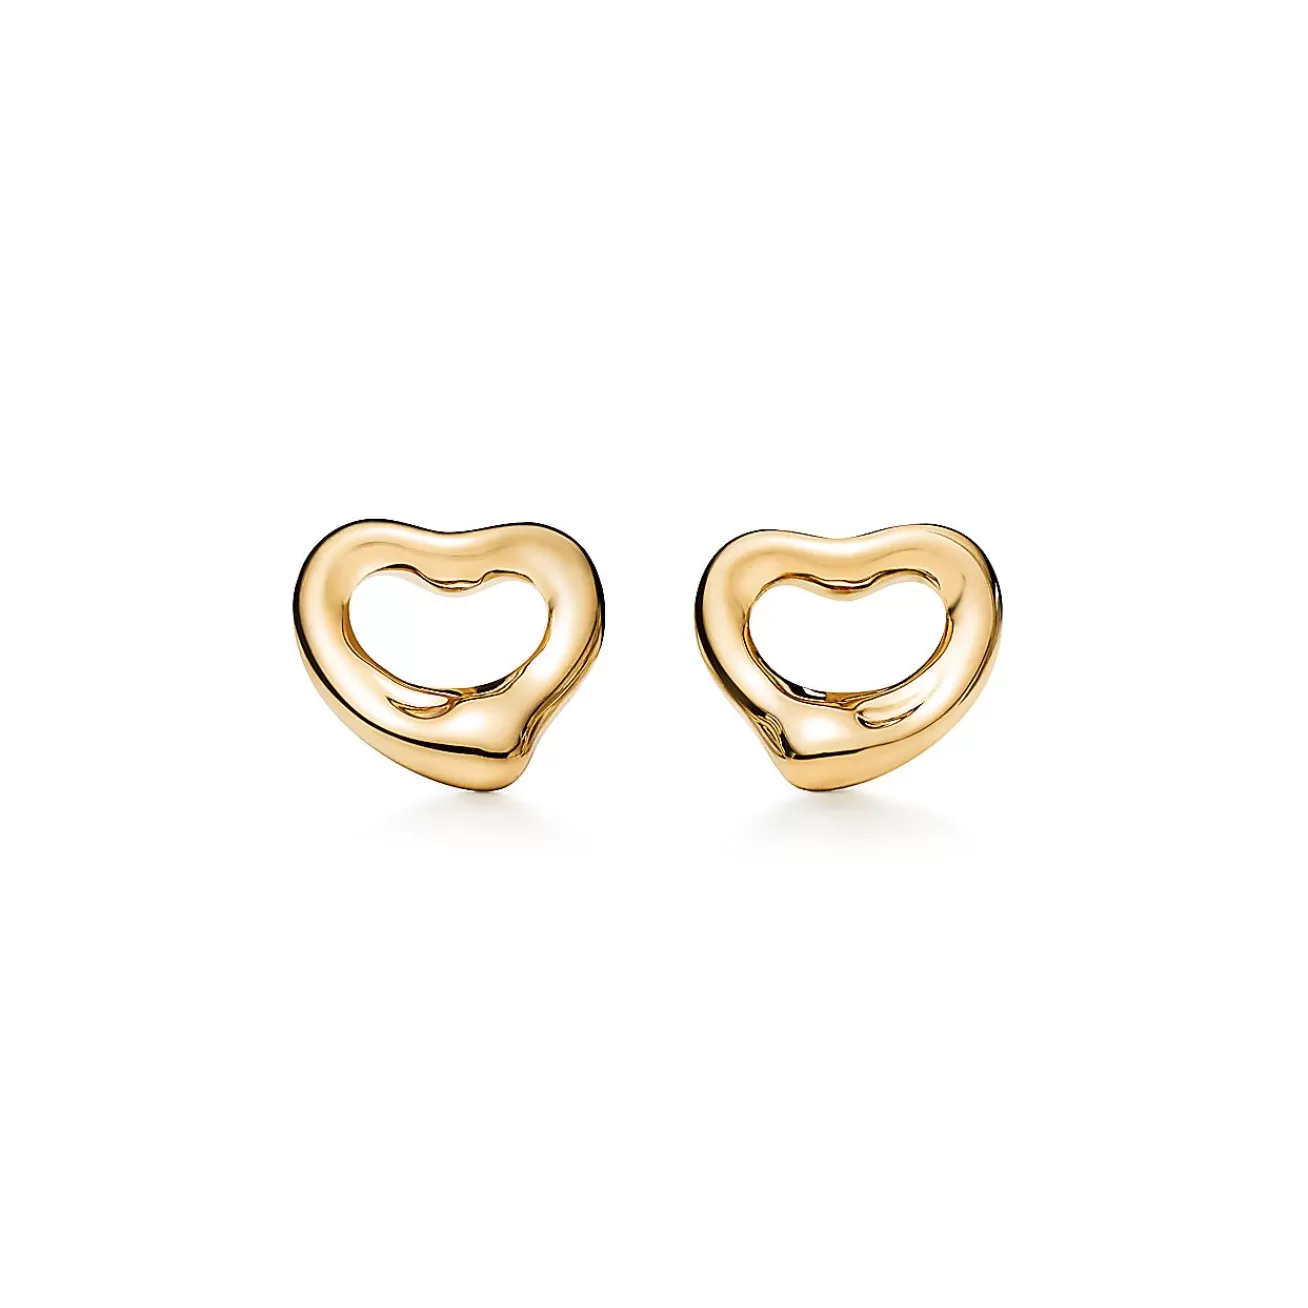 Tiffany & Co. Elsa Peretti® Open Heart earrings in 18k gold. More sizes available. | ^ Earrings | Gifts for Her